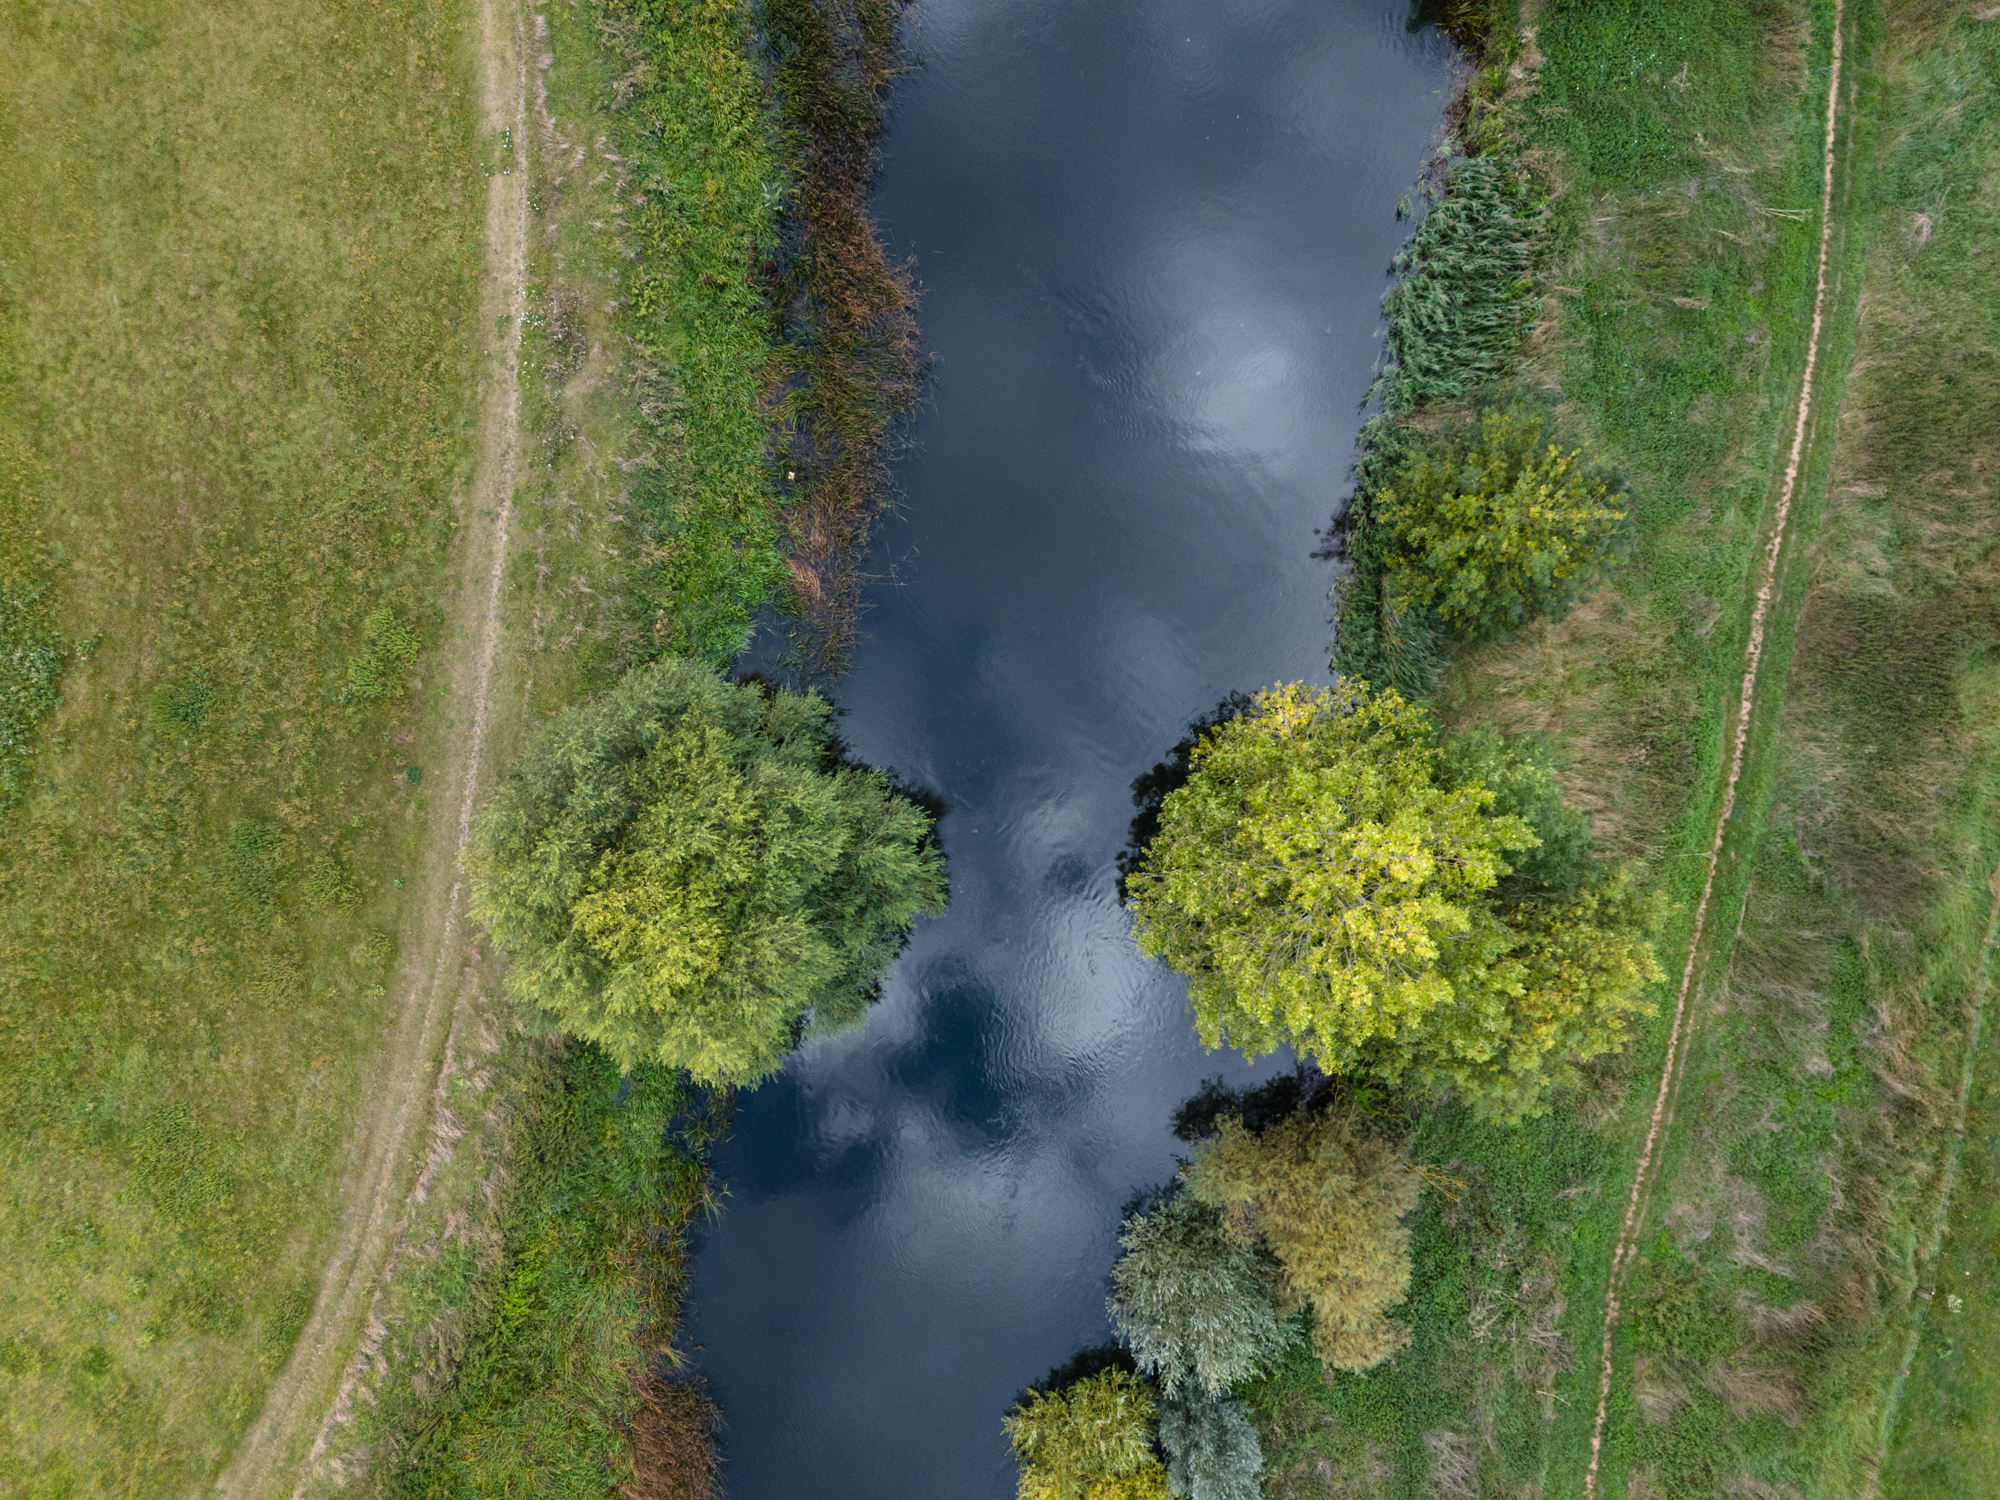 aerial view of a calm stream running between to grassy areas. Two trees, or large bushes stand opposite one another on the shores of the stream in the image center.